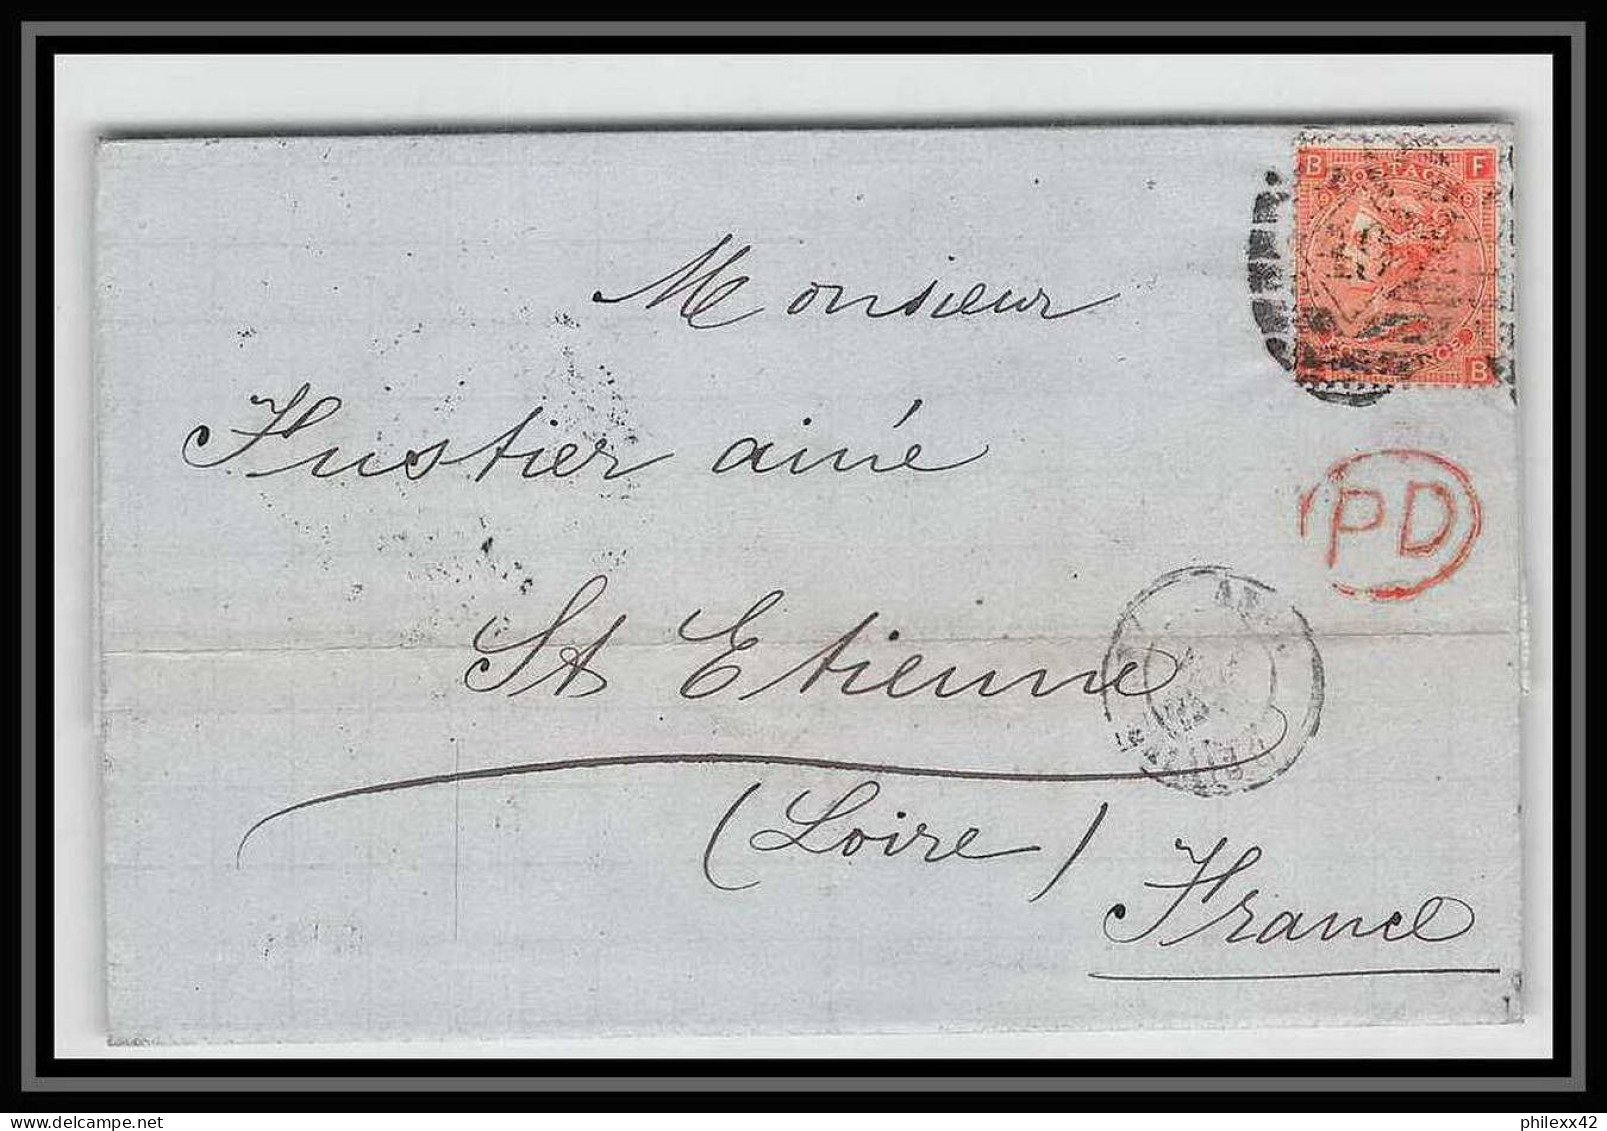 35684 N°32 Victoria 4p Red London St Etienne France 1868 Cachet 49 Lettre Cover Grande Bretagne England - Covers & Documents